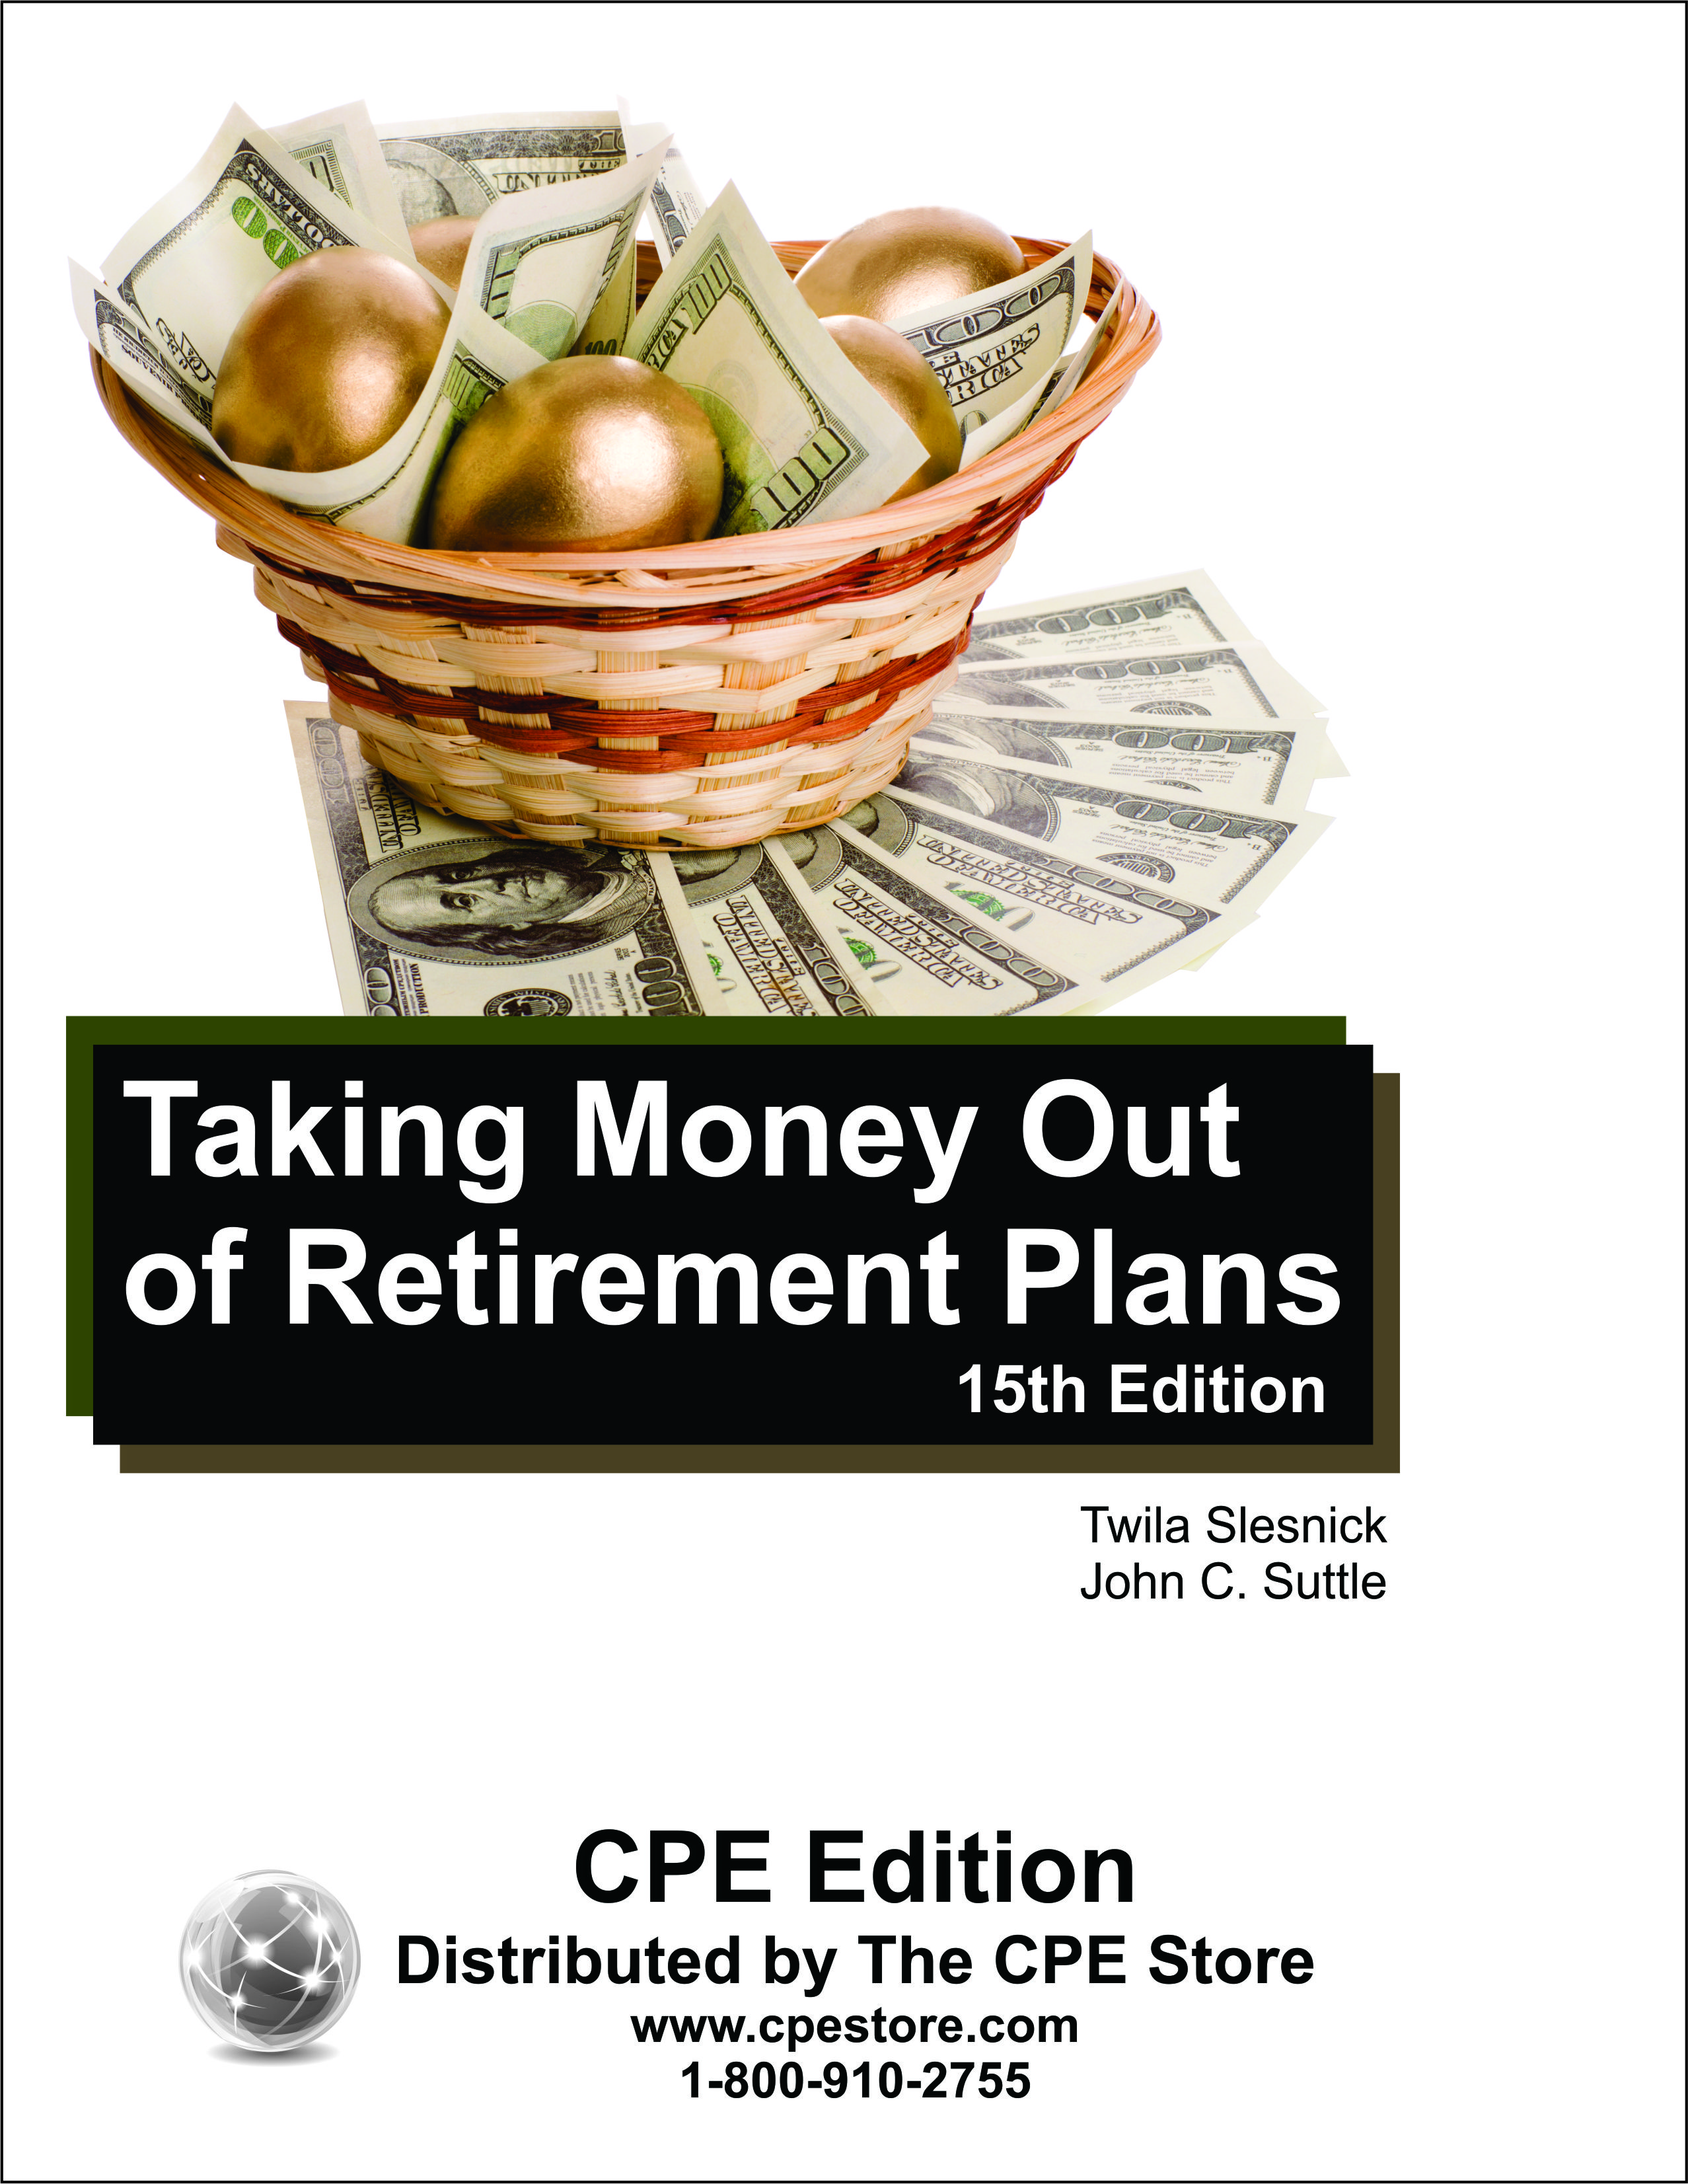 Taking Money Out of Retirement Plans